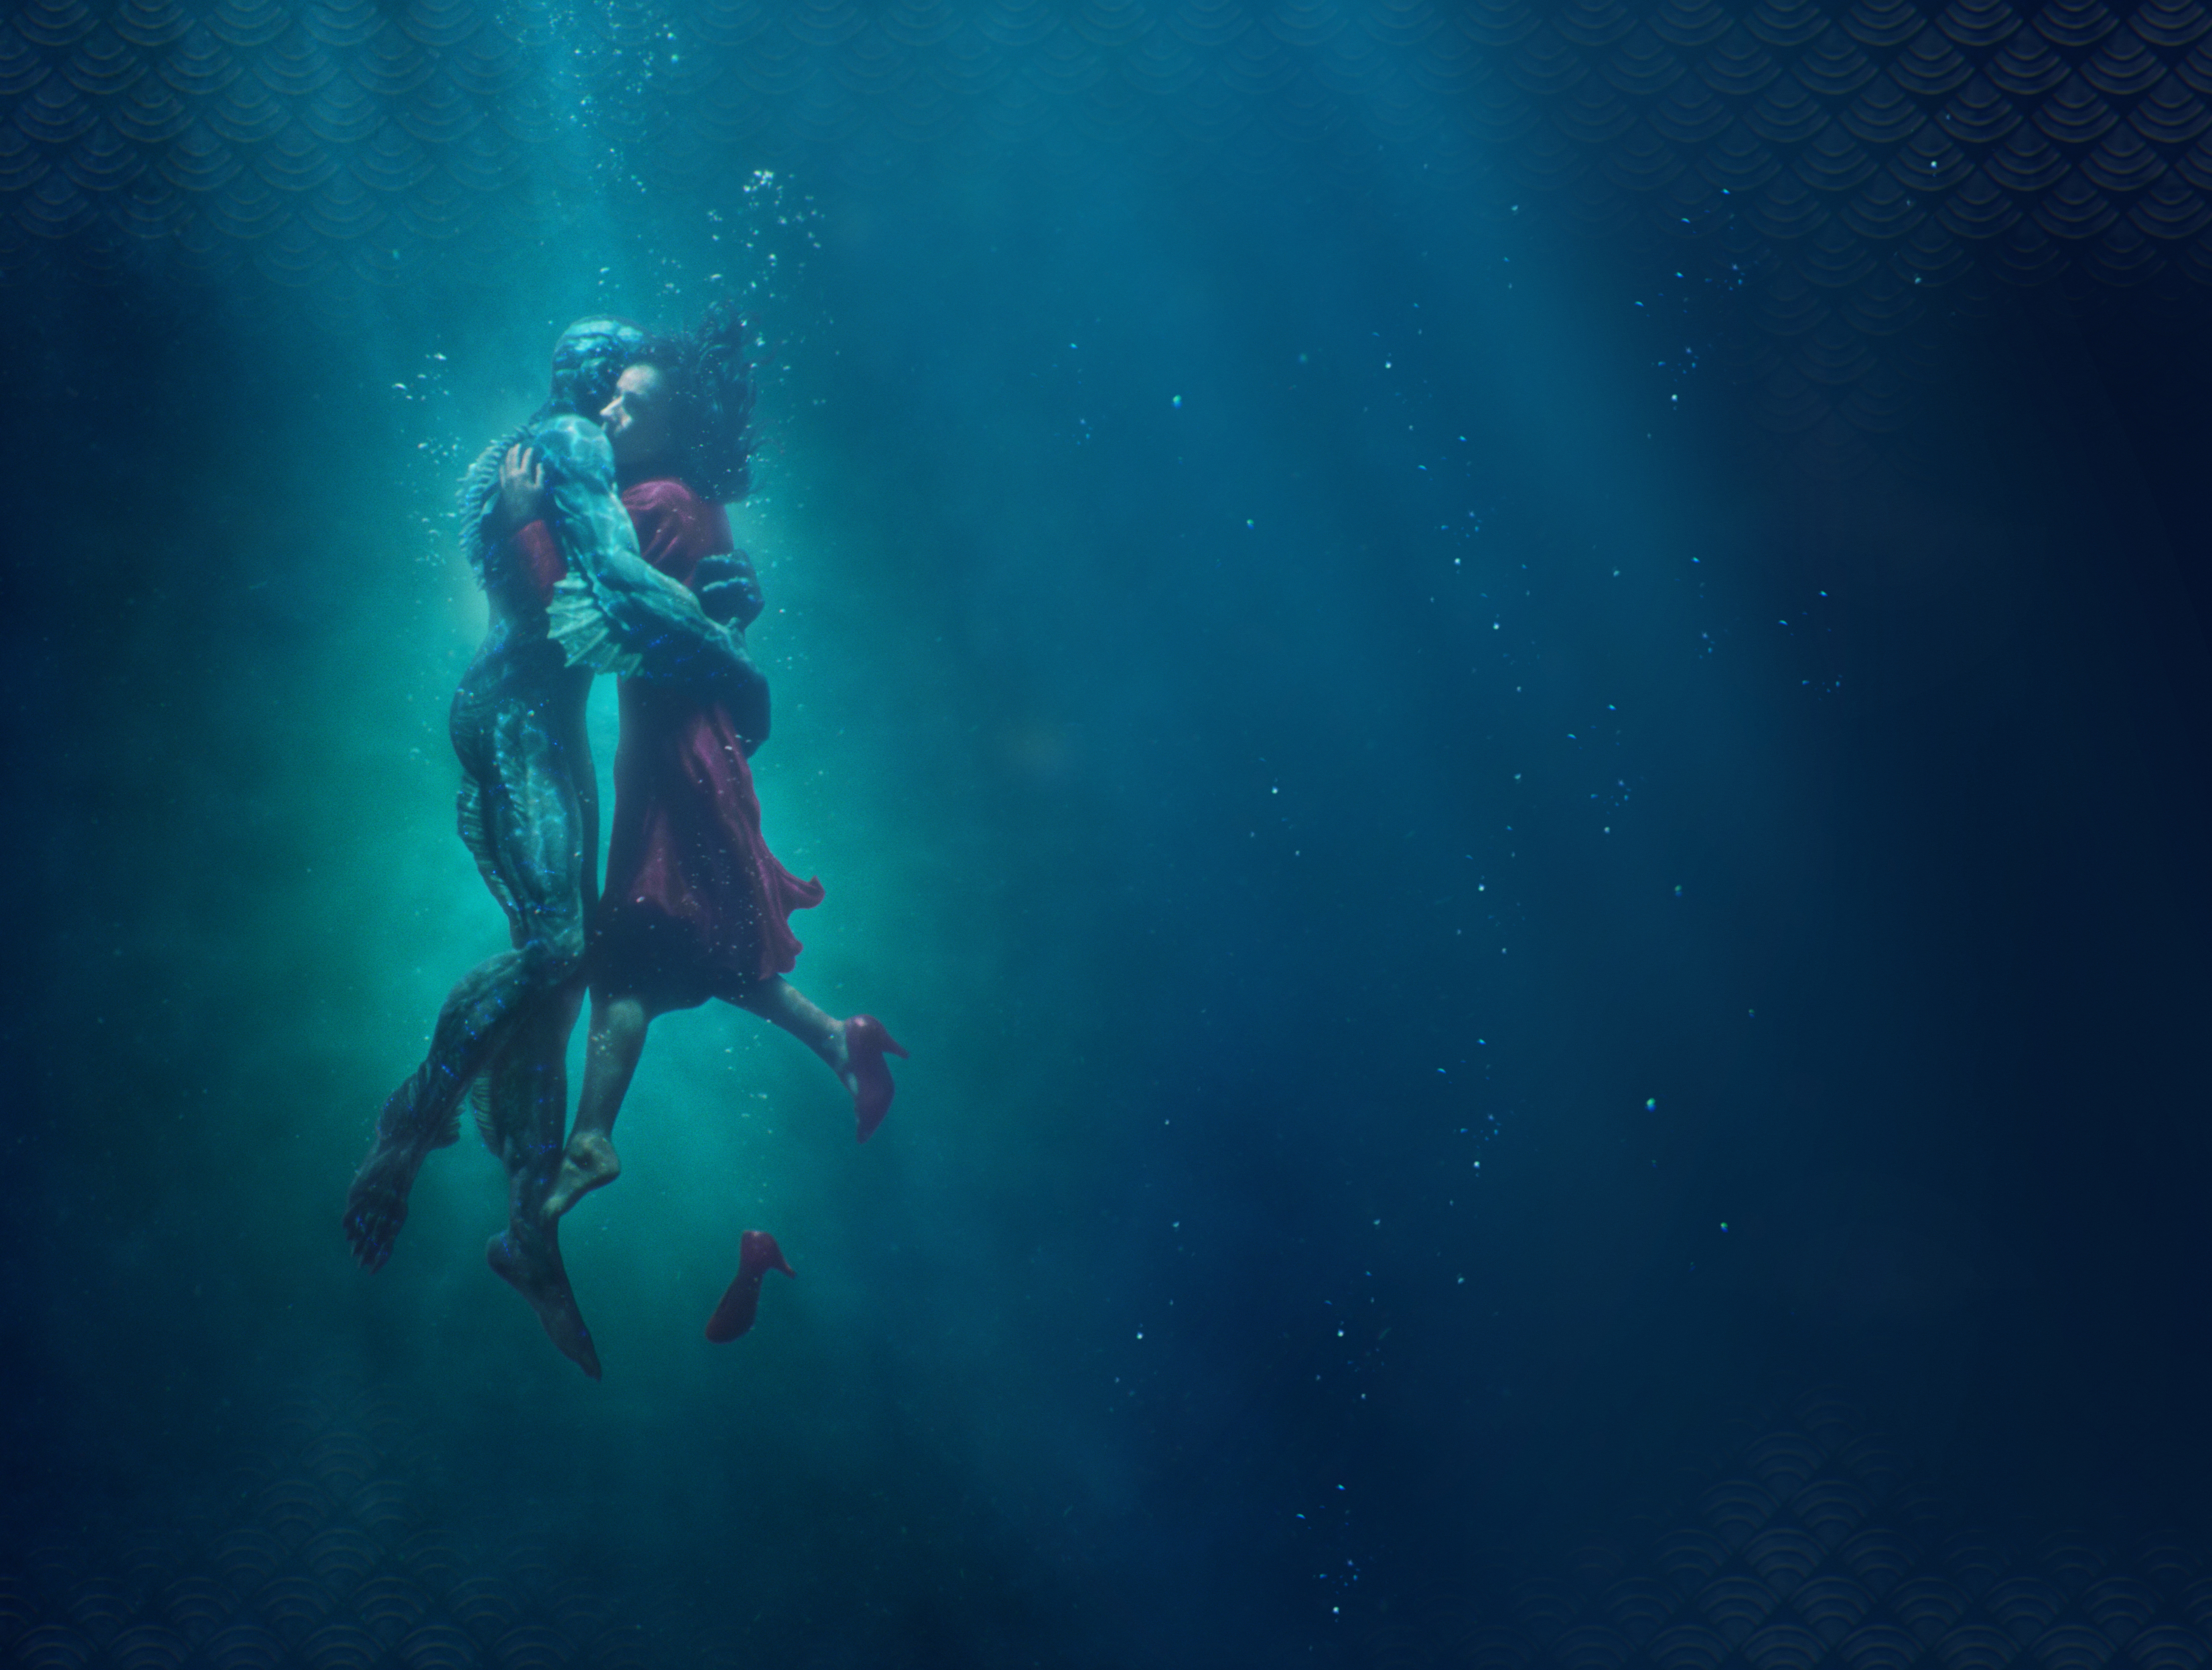 Movie The Shape of Water HD Wallpaper | Background Image